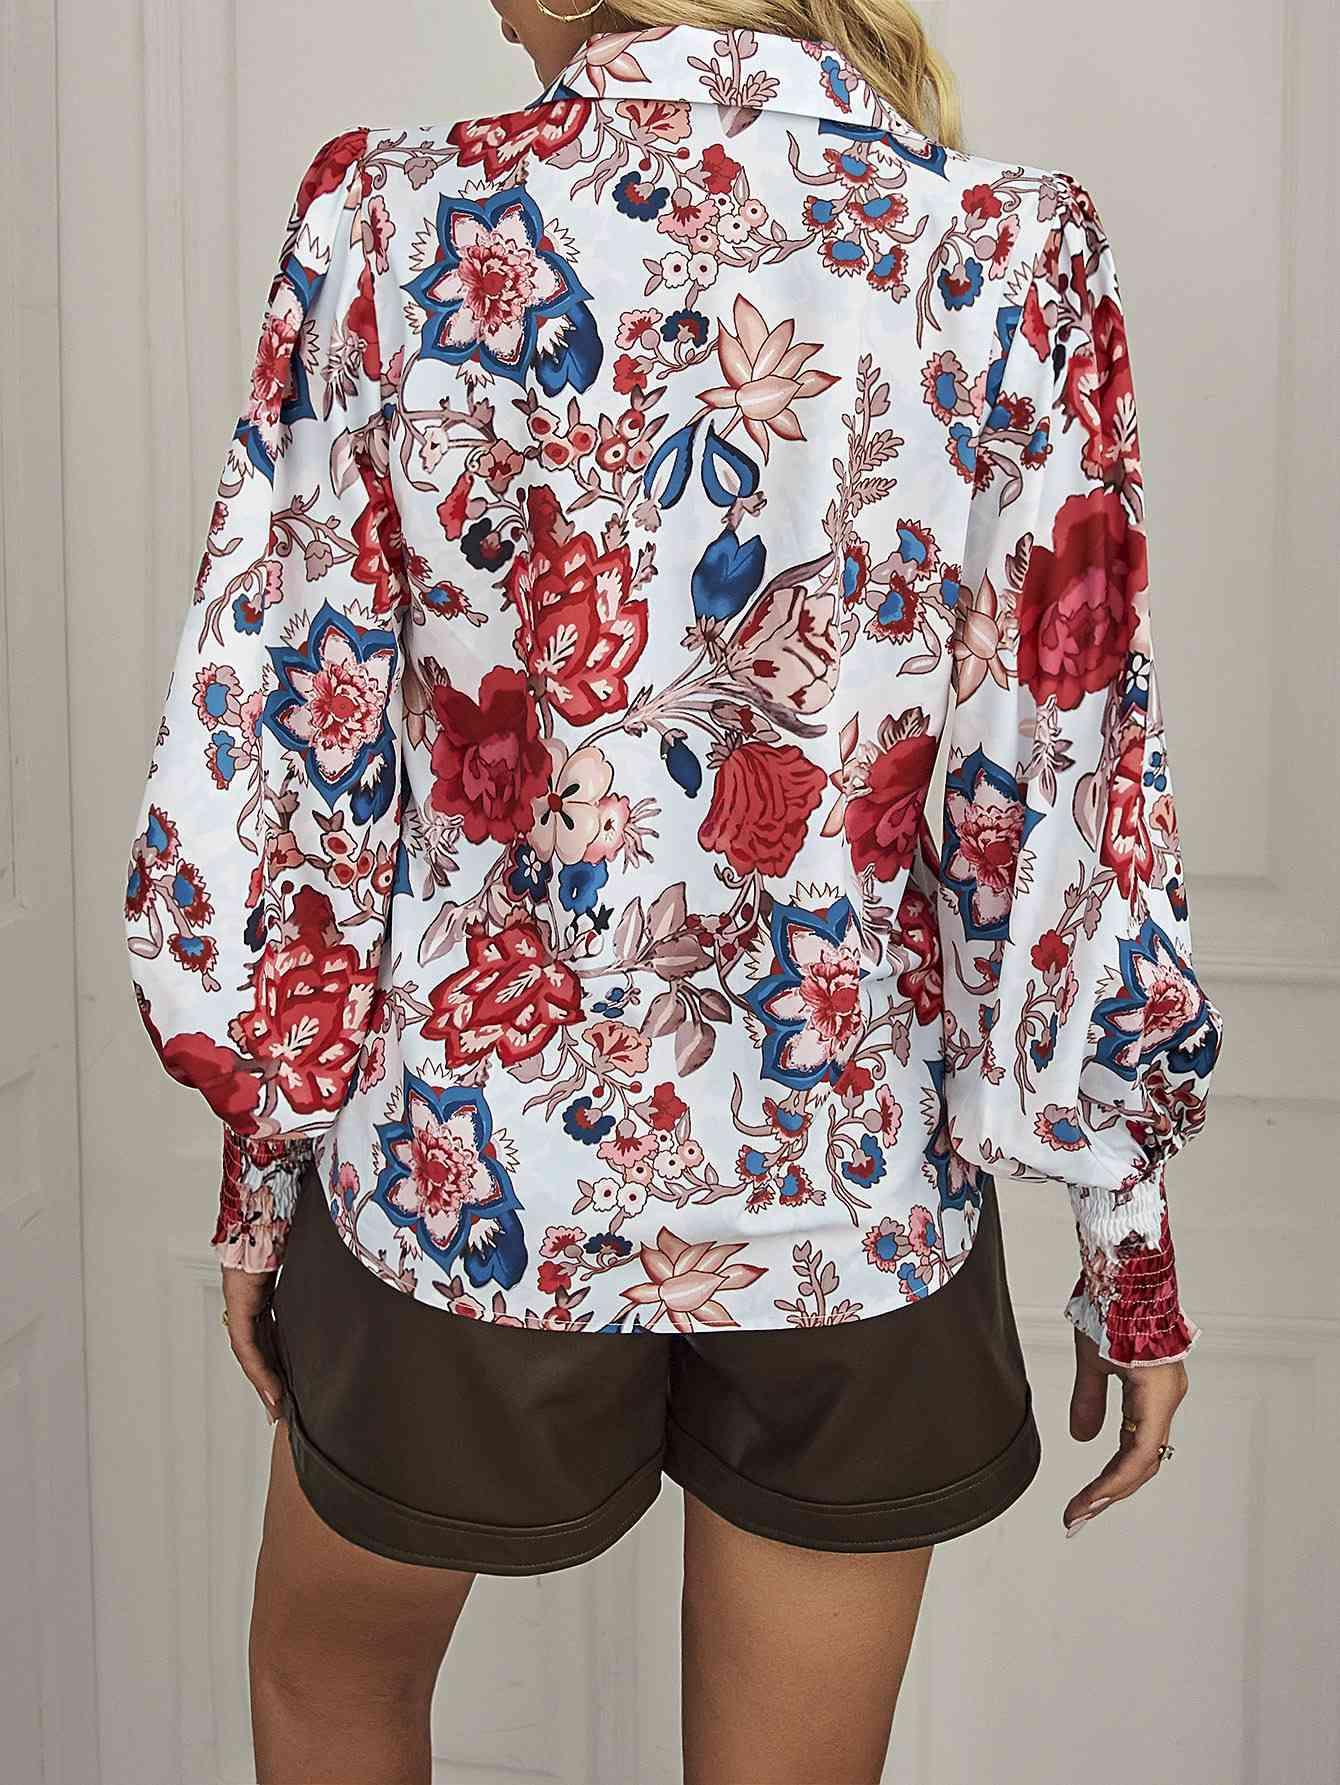 a woman wearing a floral shirt and shorts